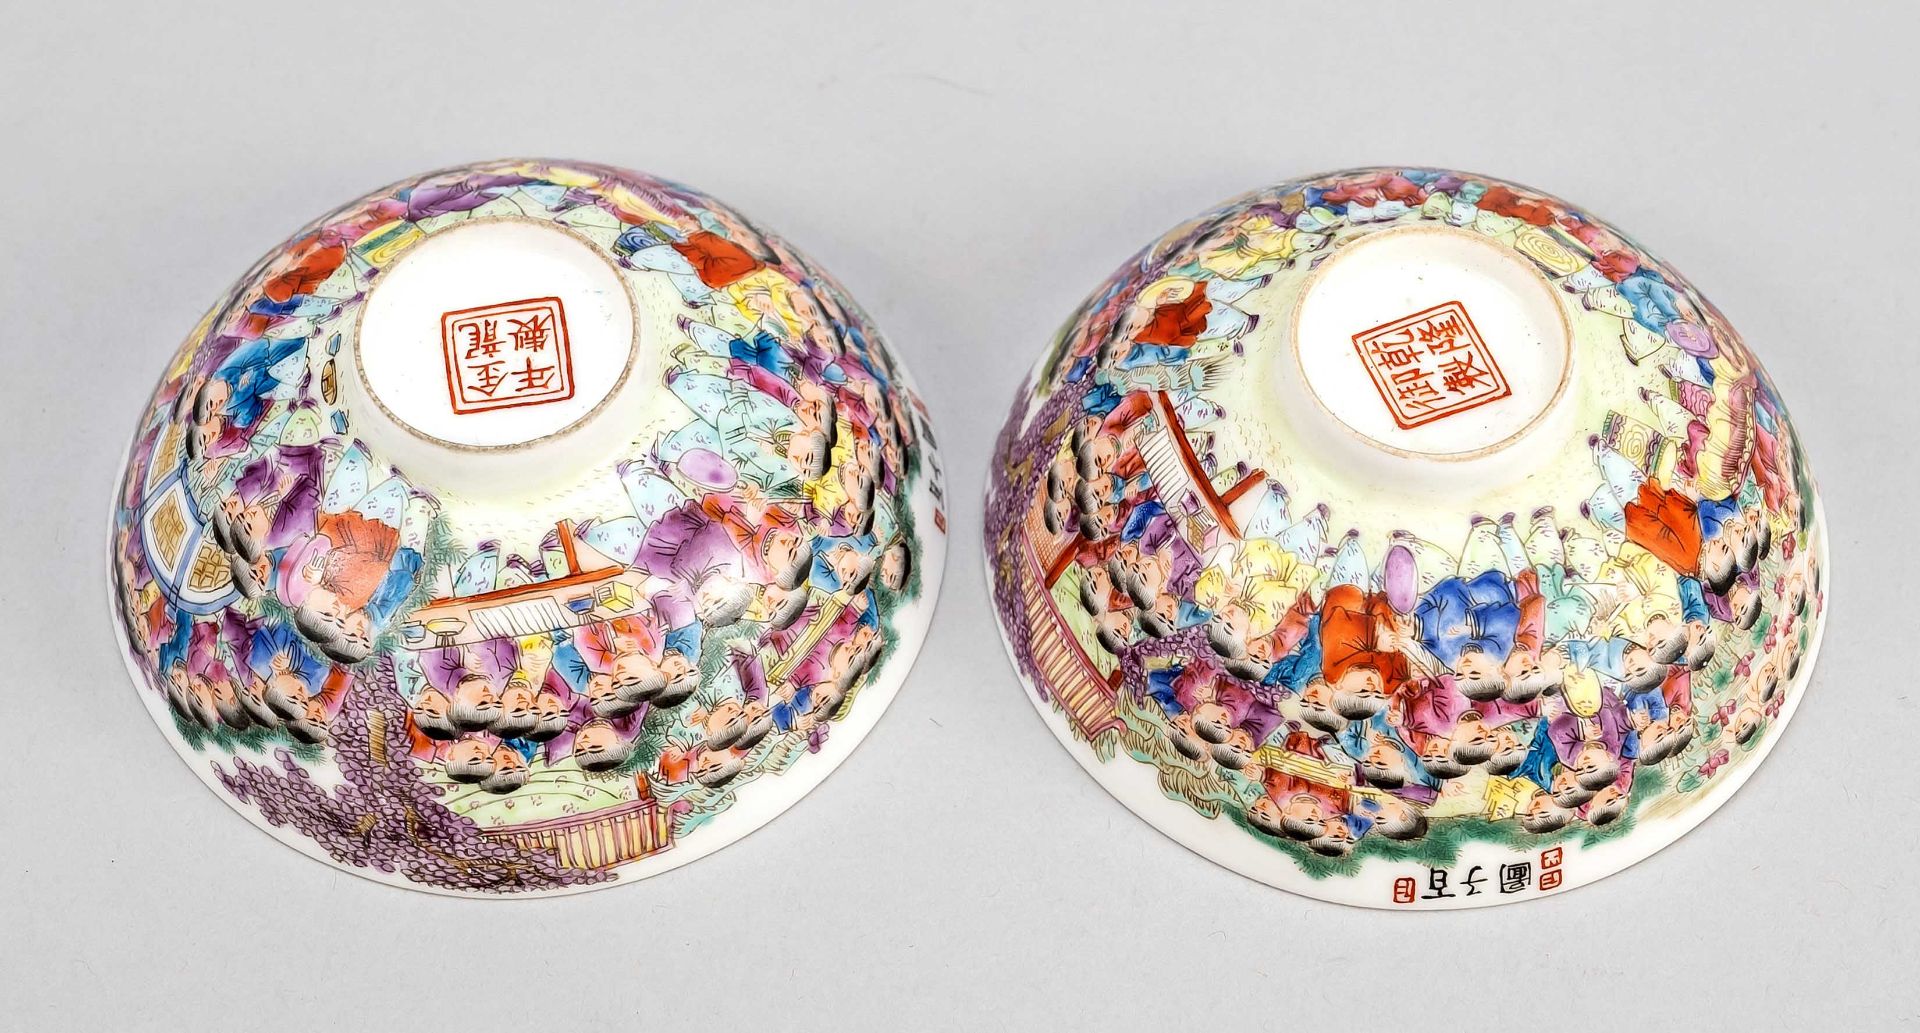 Pair of tea bowls 100 children, China, probably republic period(1912-1949), porcelain with - Image 2 of 3